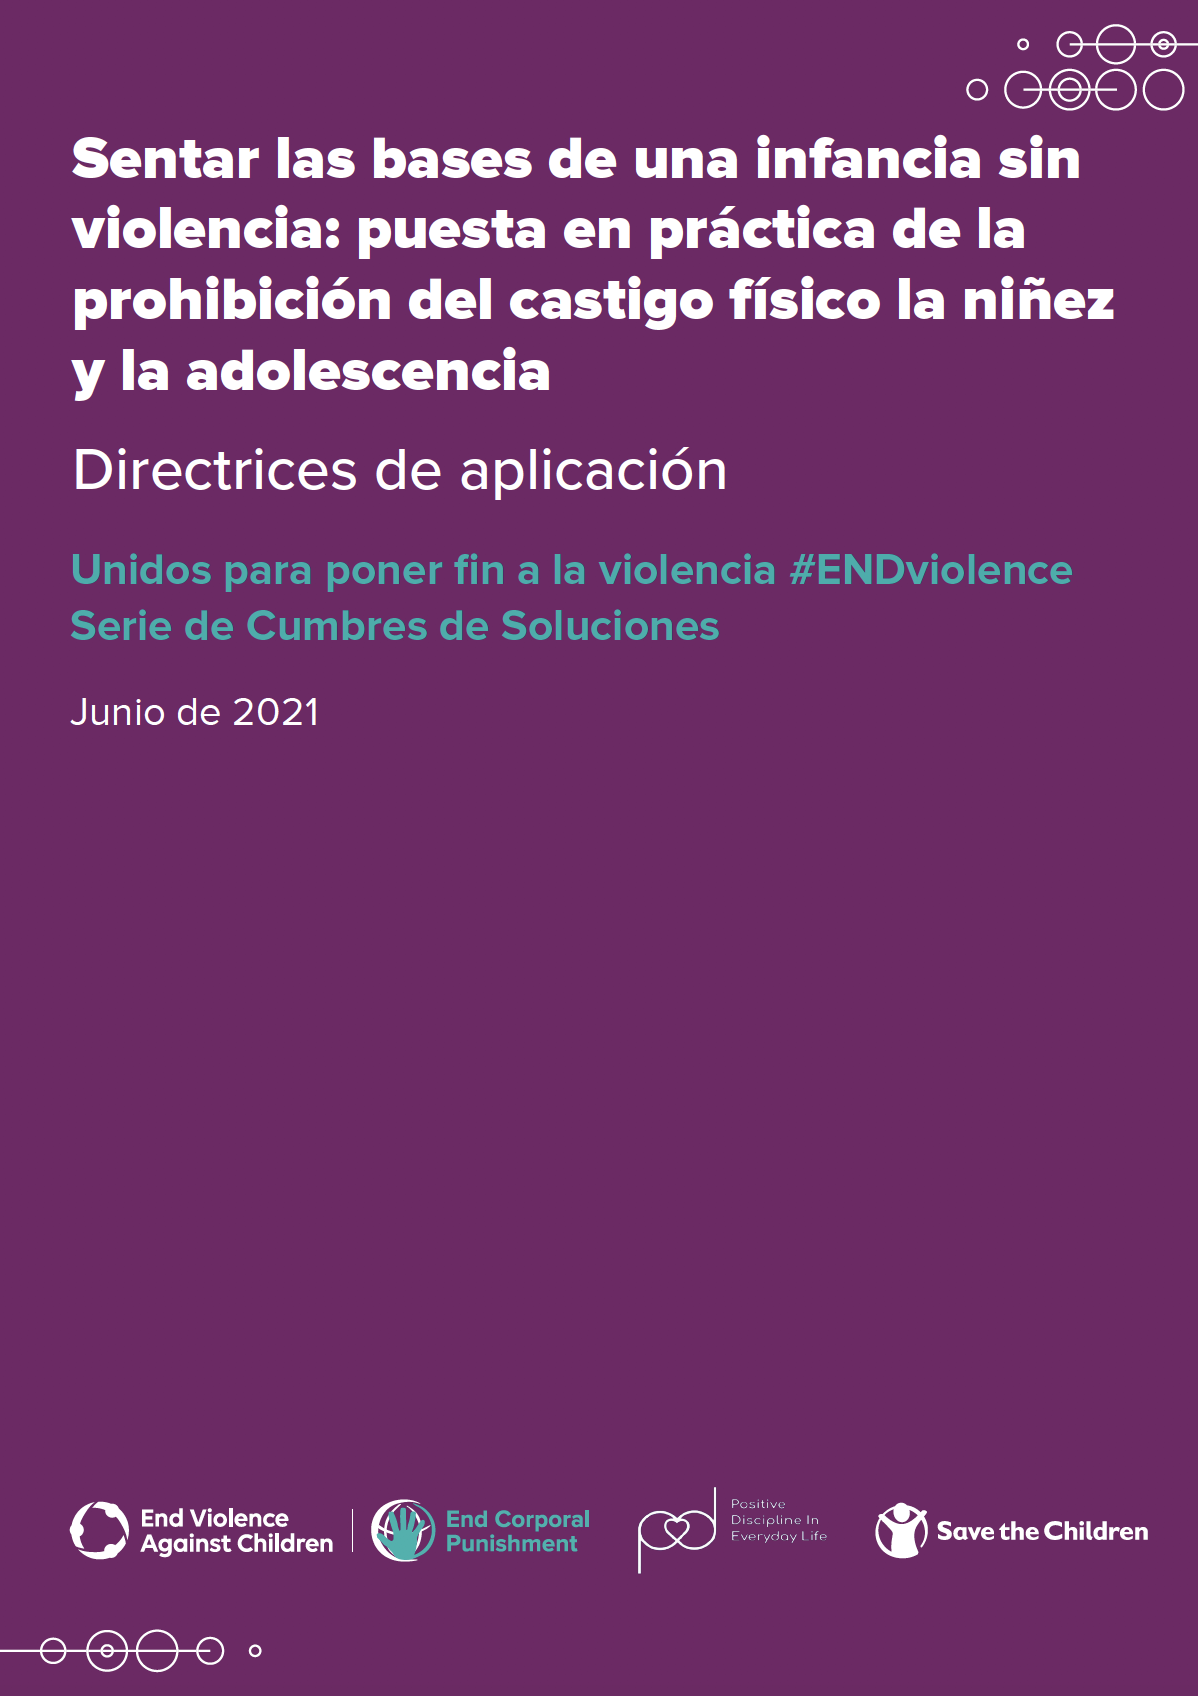 Implementation guidance in Spanish